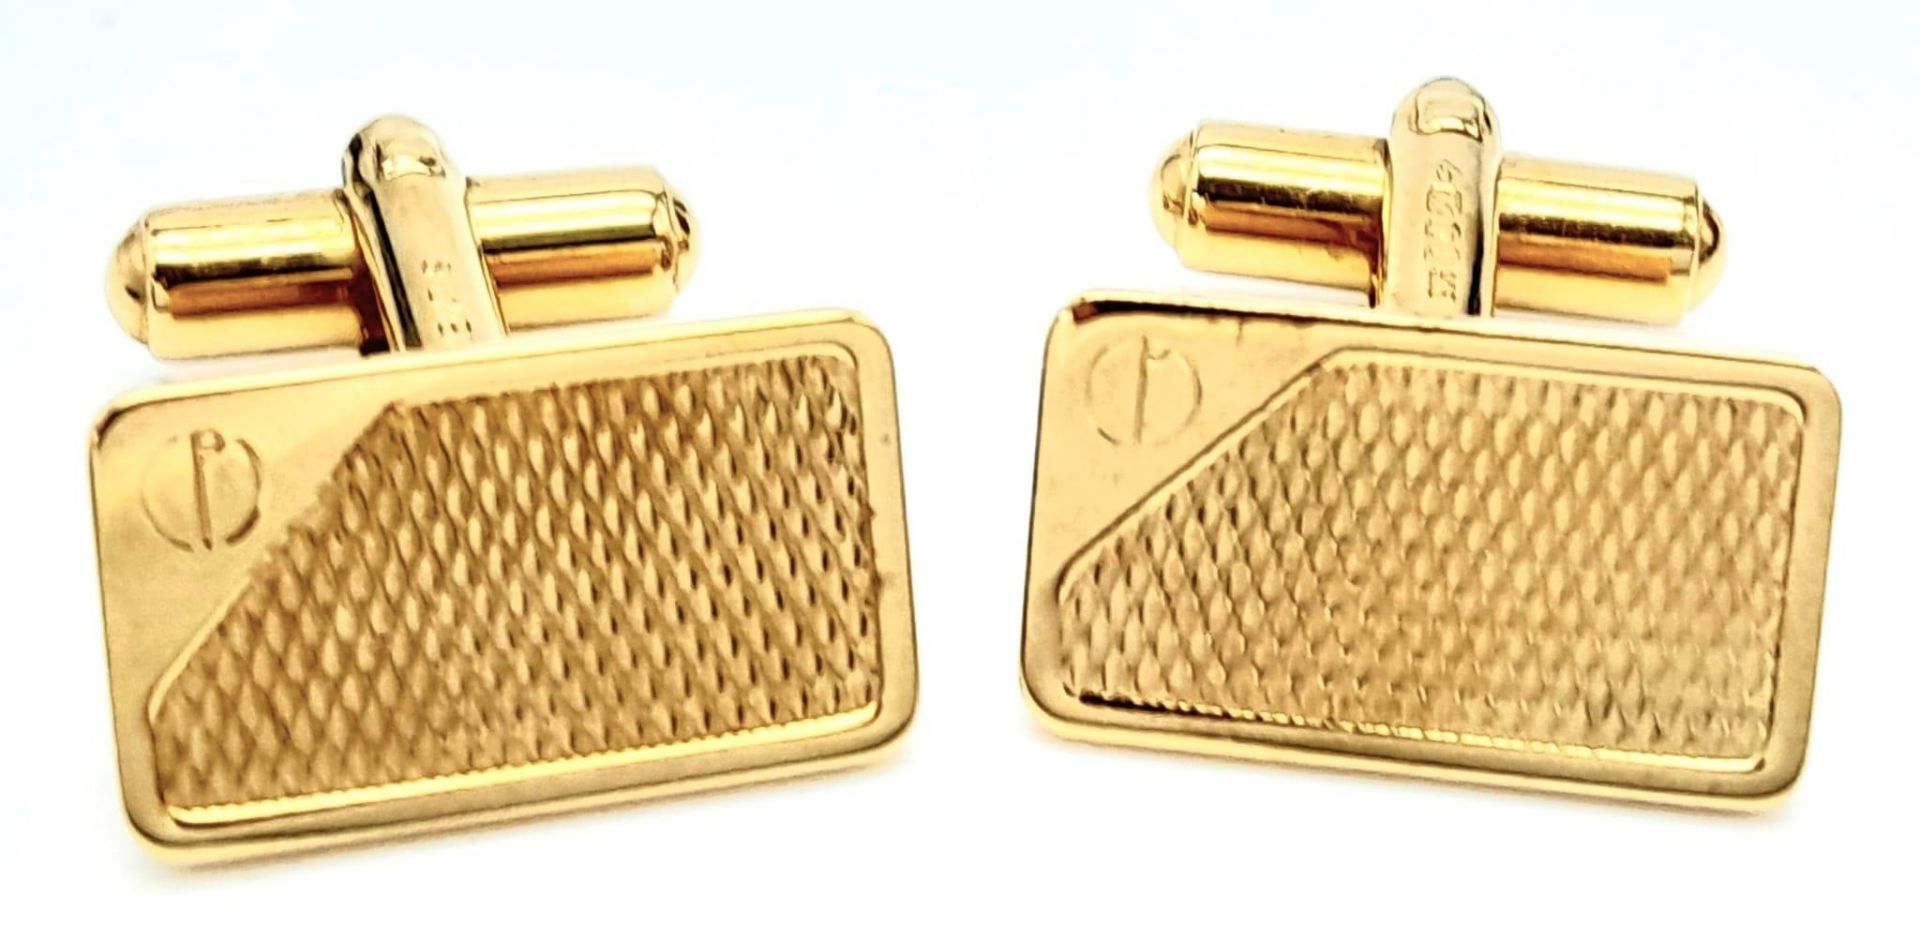 A Pair of Hallmarked 1985 Yellow Gold Gilt Sterling Silver Cufflinks by Dunhill in their original